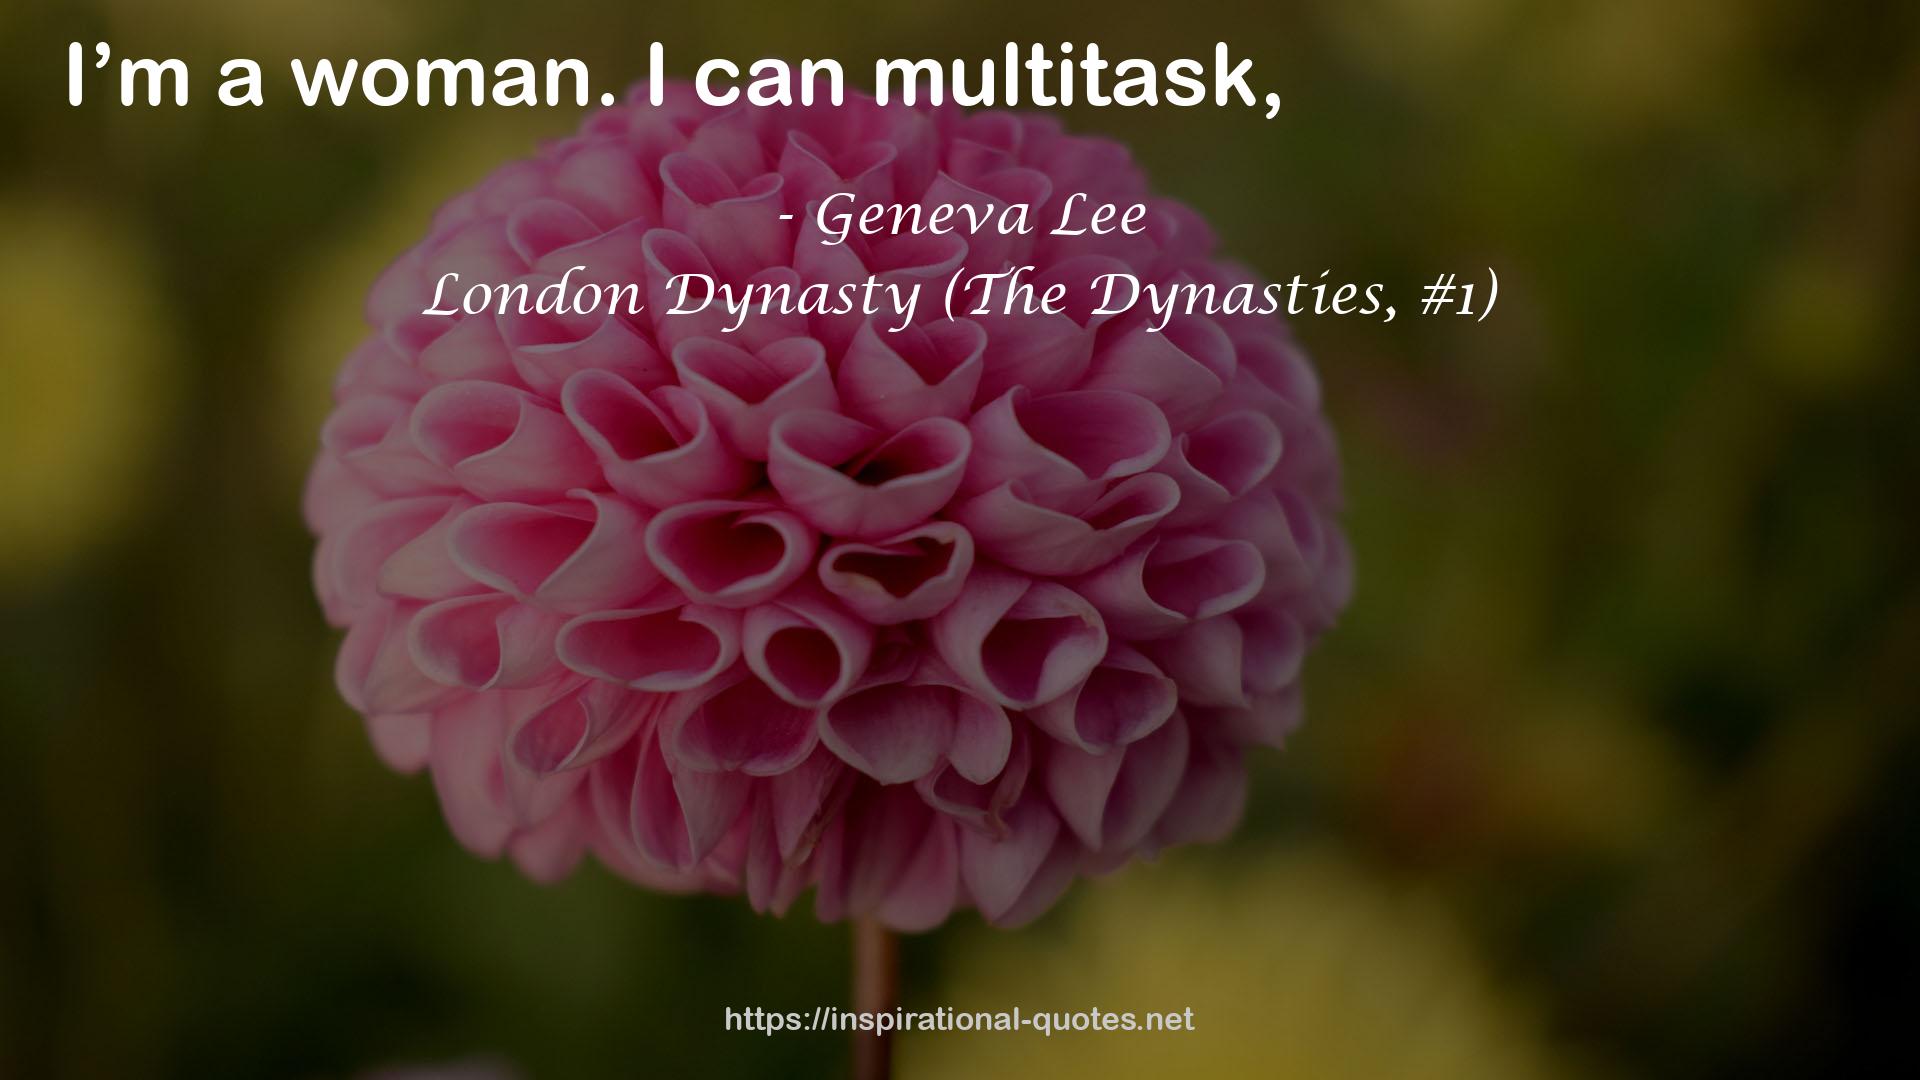 London Dynasty (The Dynasties, #1) QUOTES